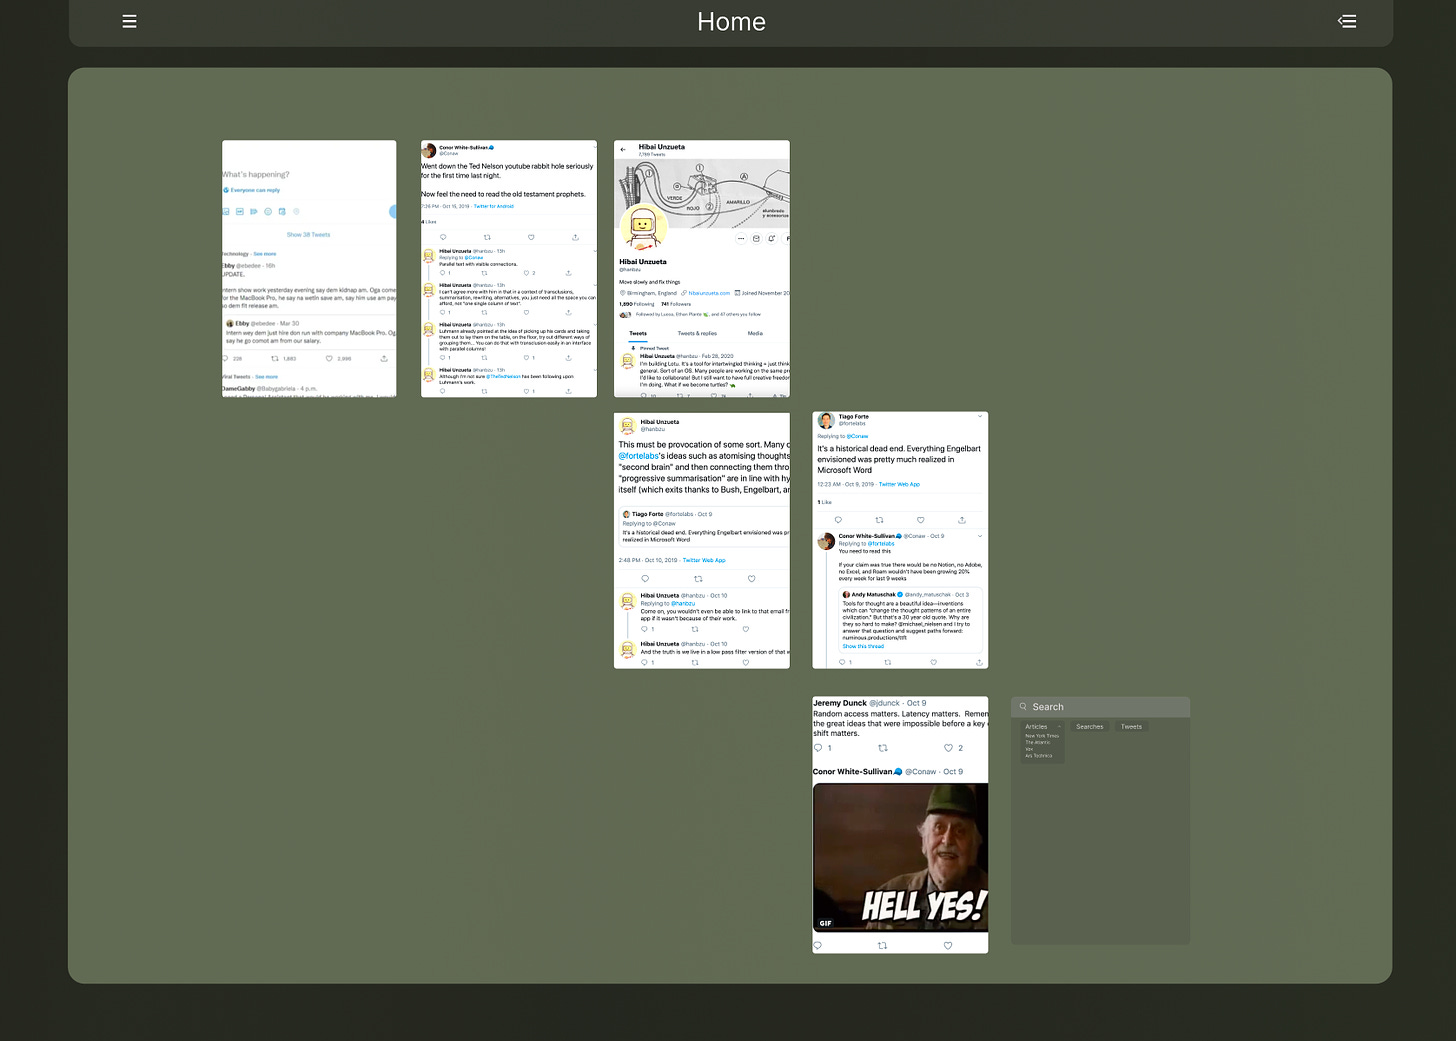 A mock-up organizing the Memex Drama thread in a Reader environment